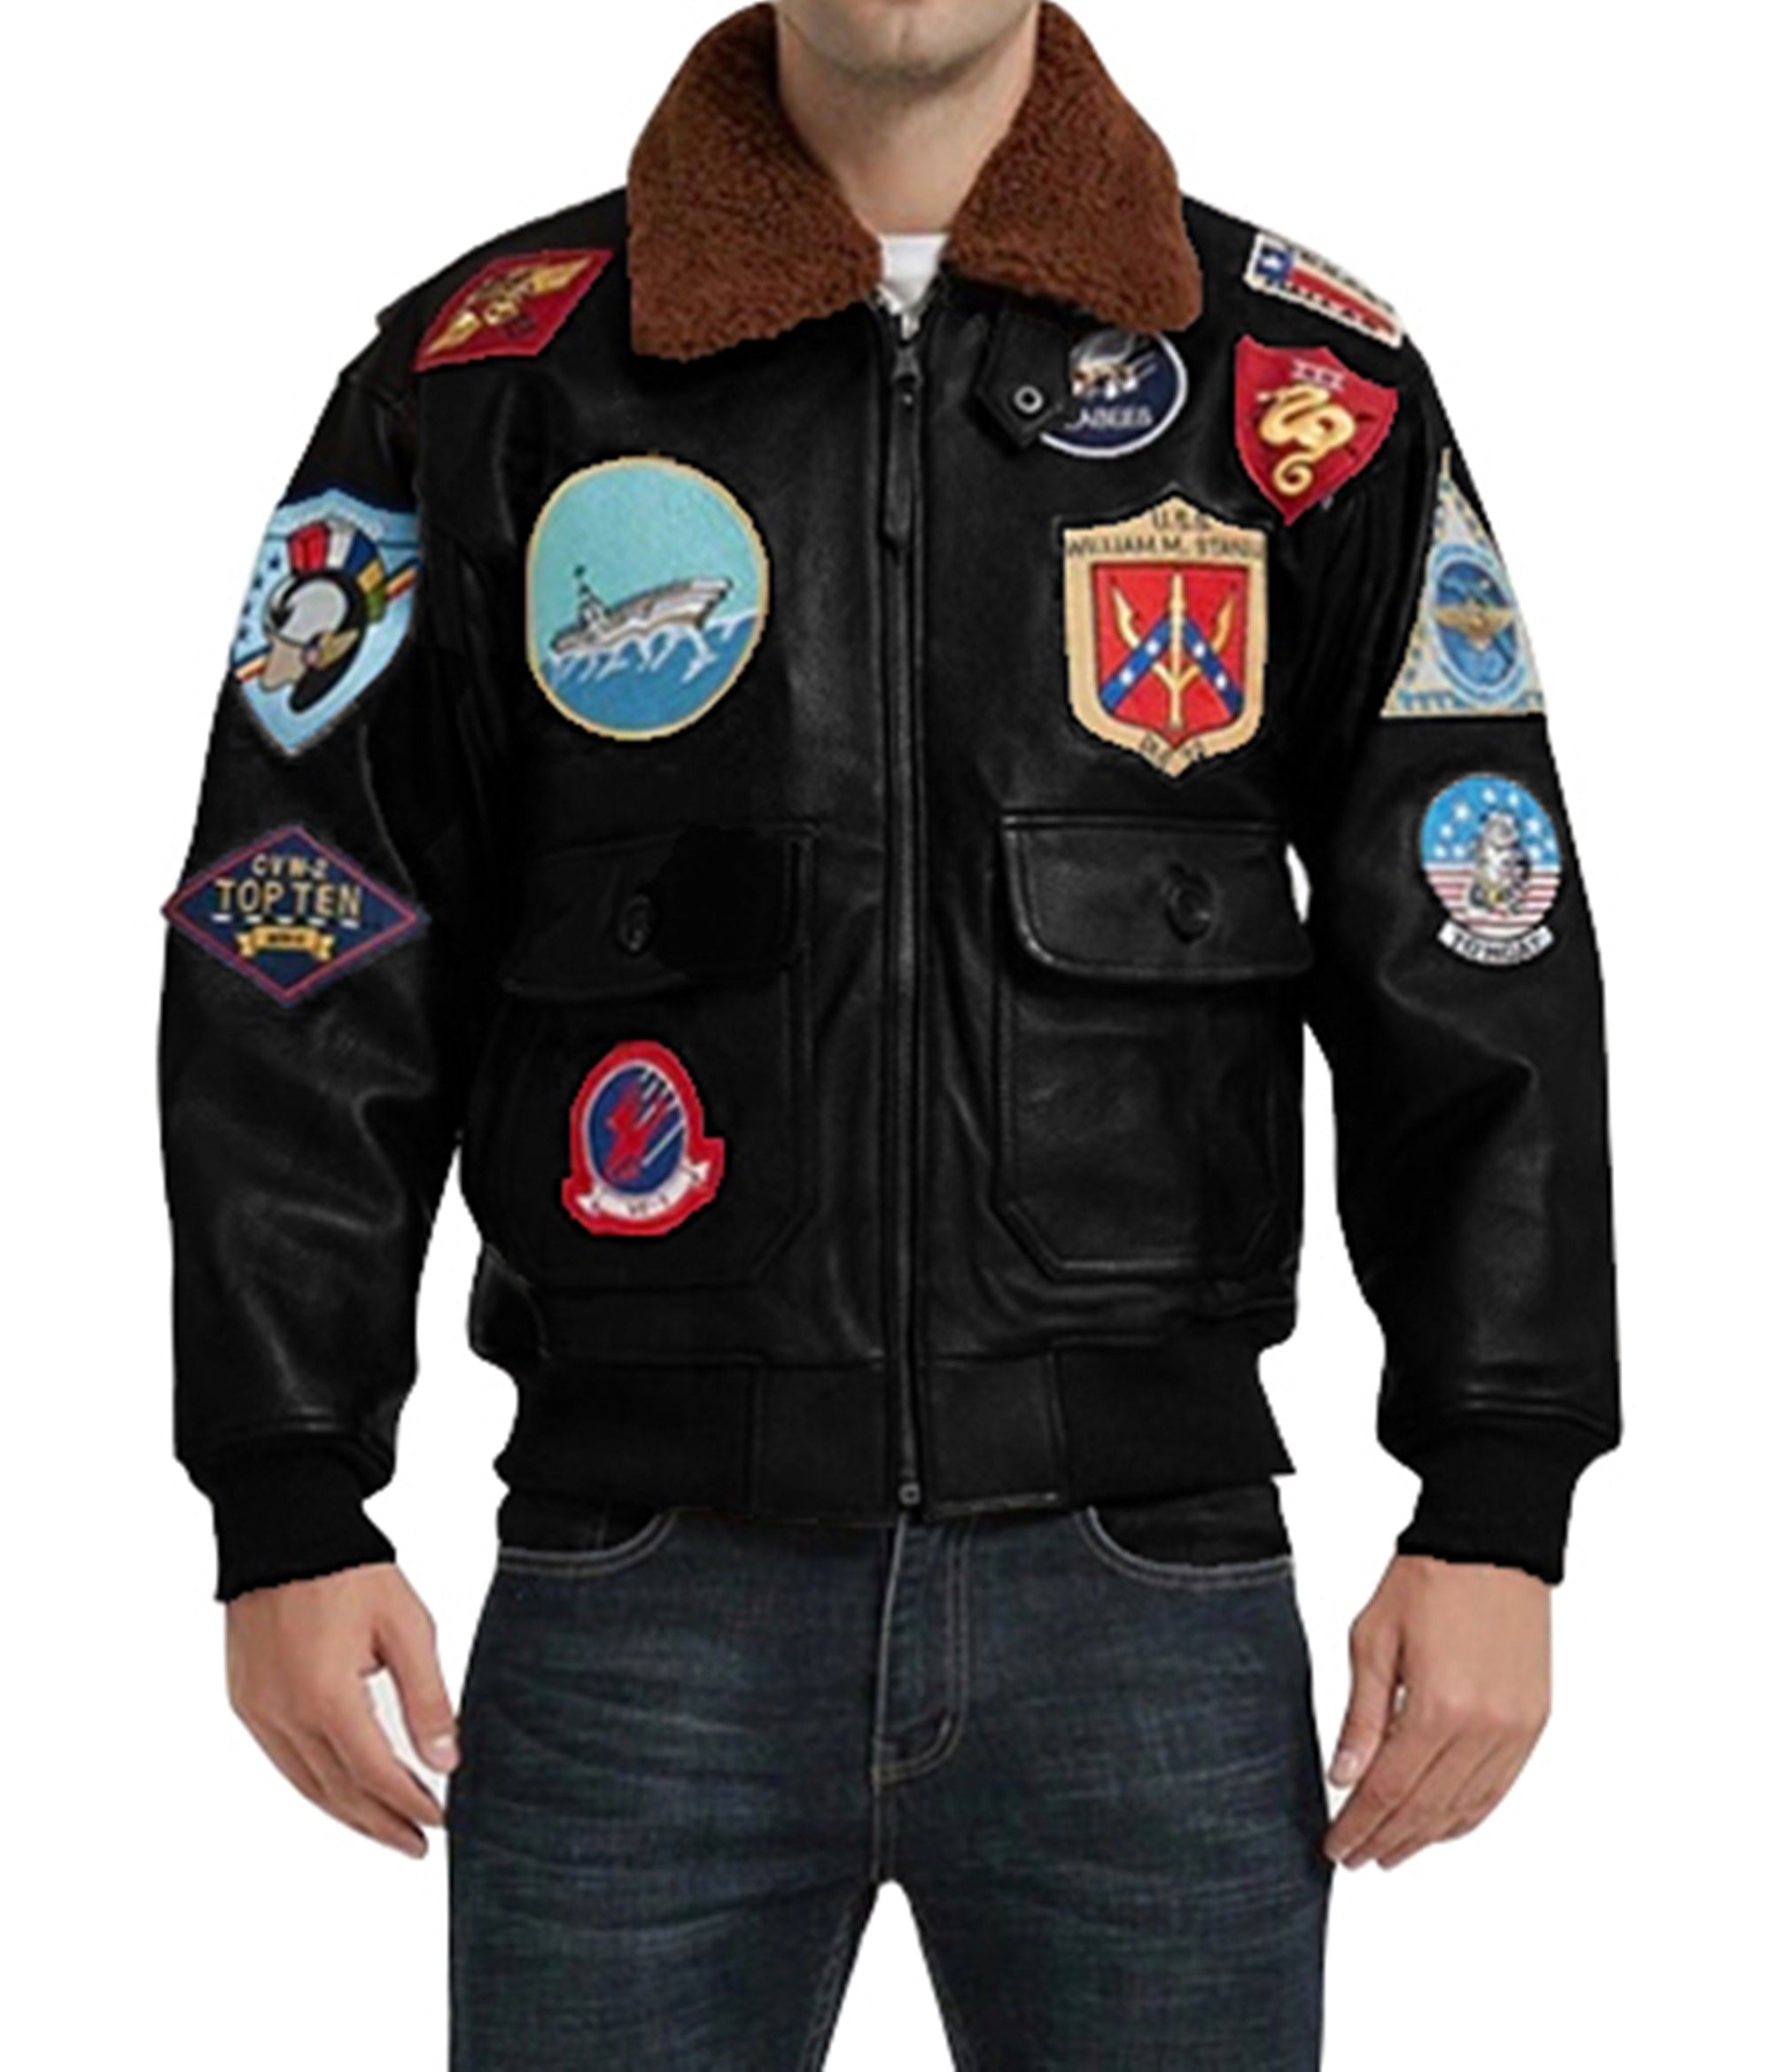 Top Gun Genuine Leather Jacket Tom Cruise Top - Ultimate Leather Jackets